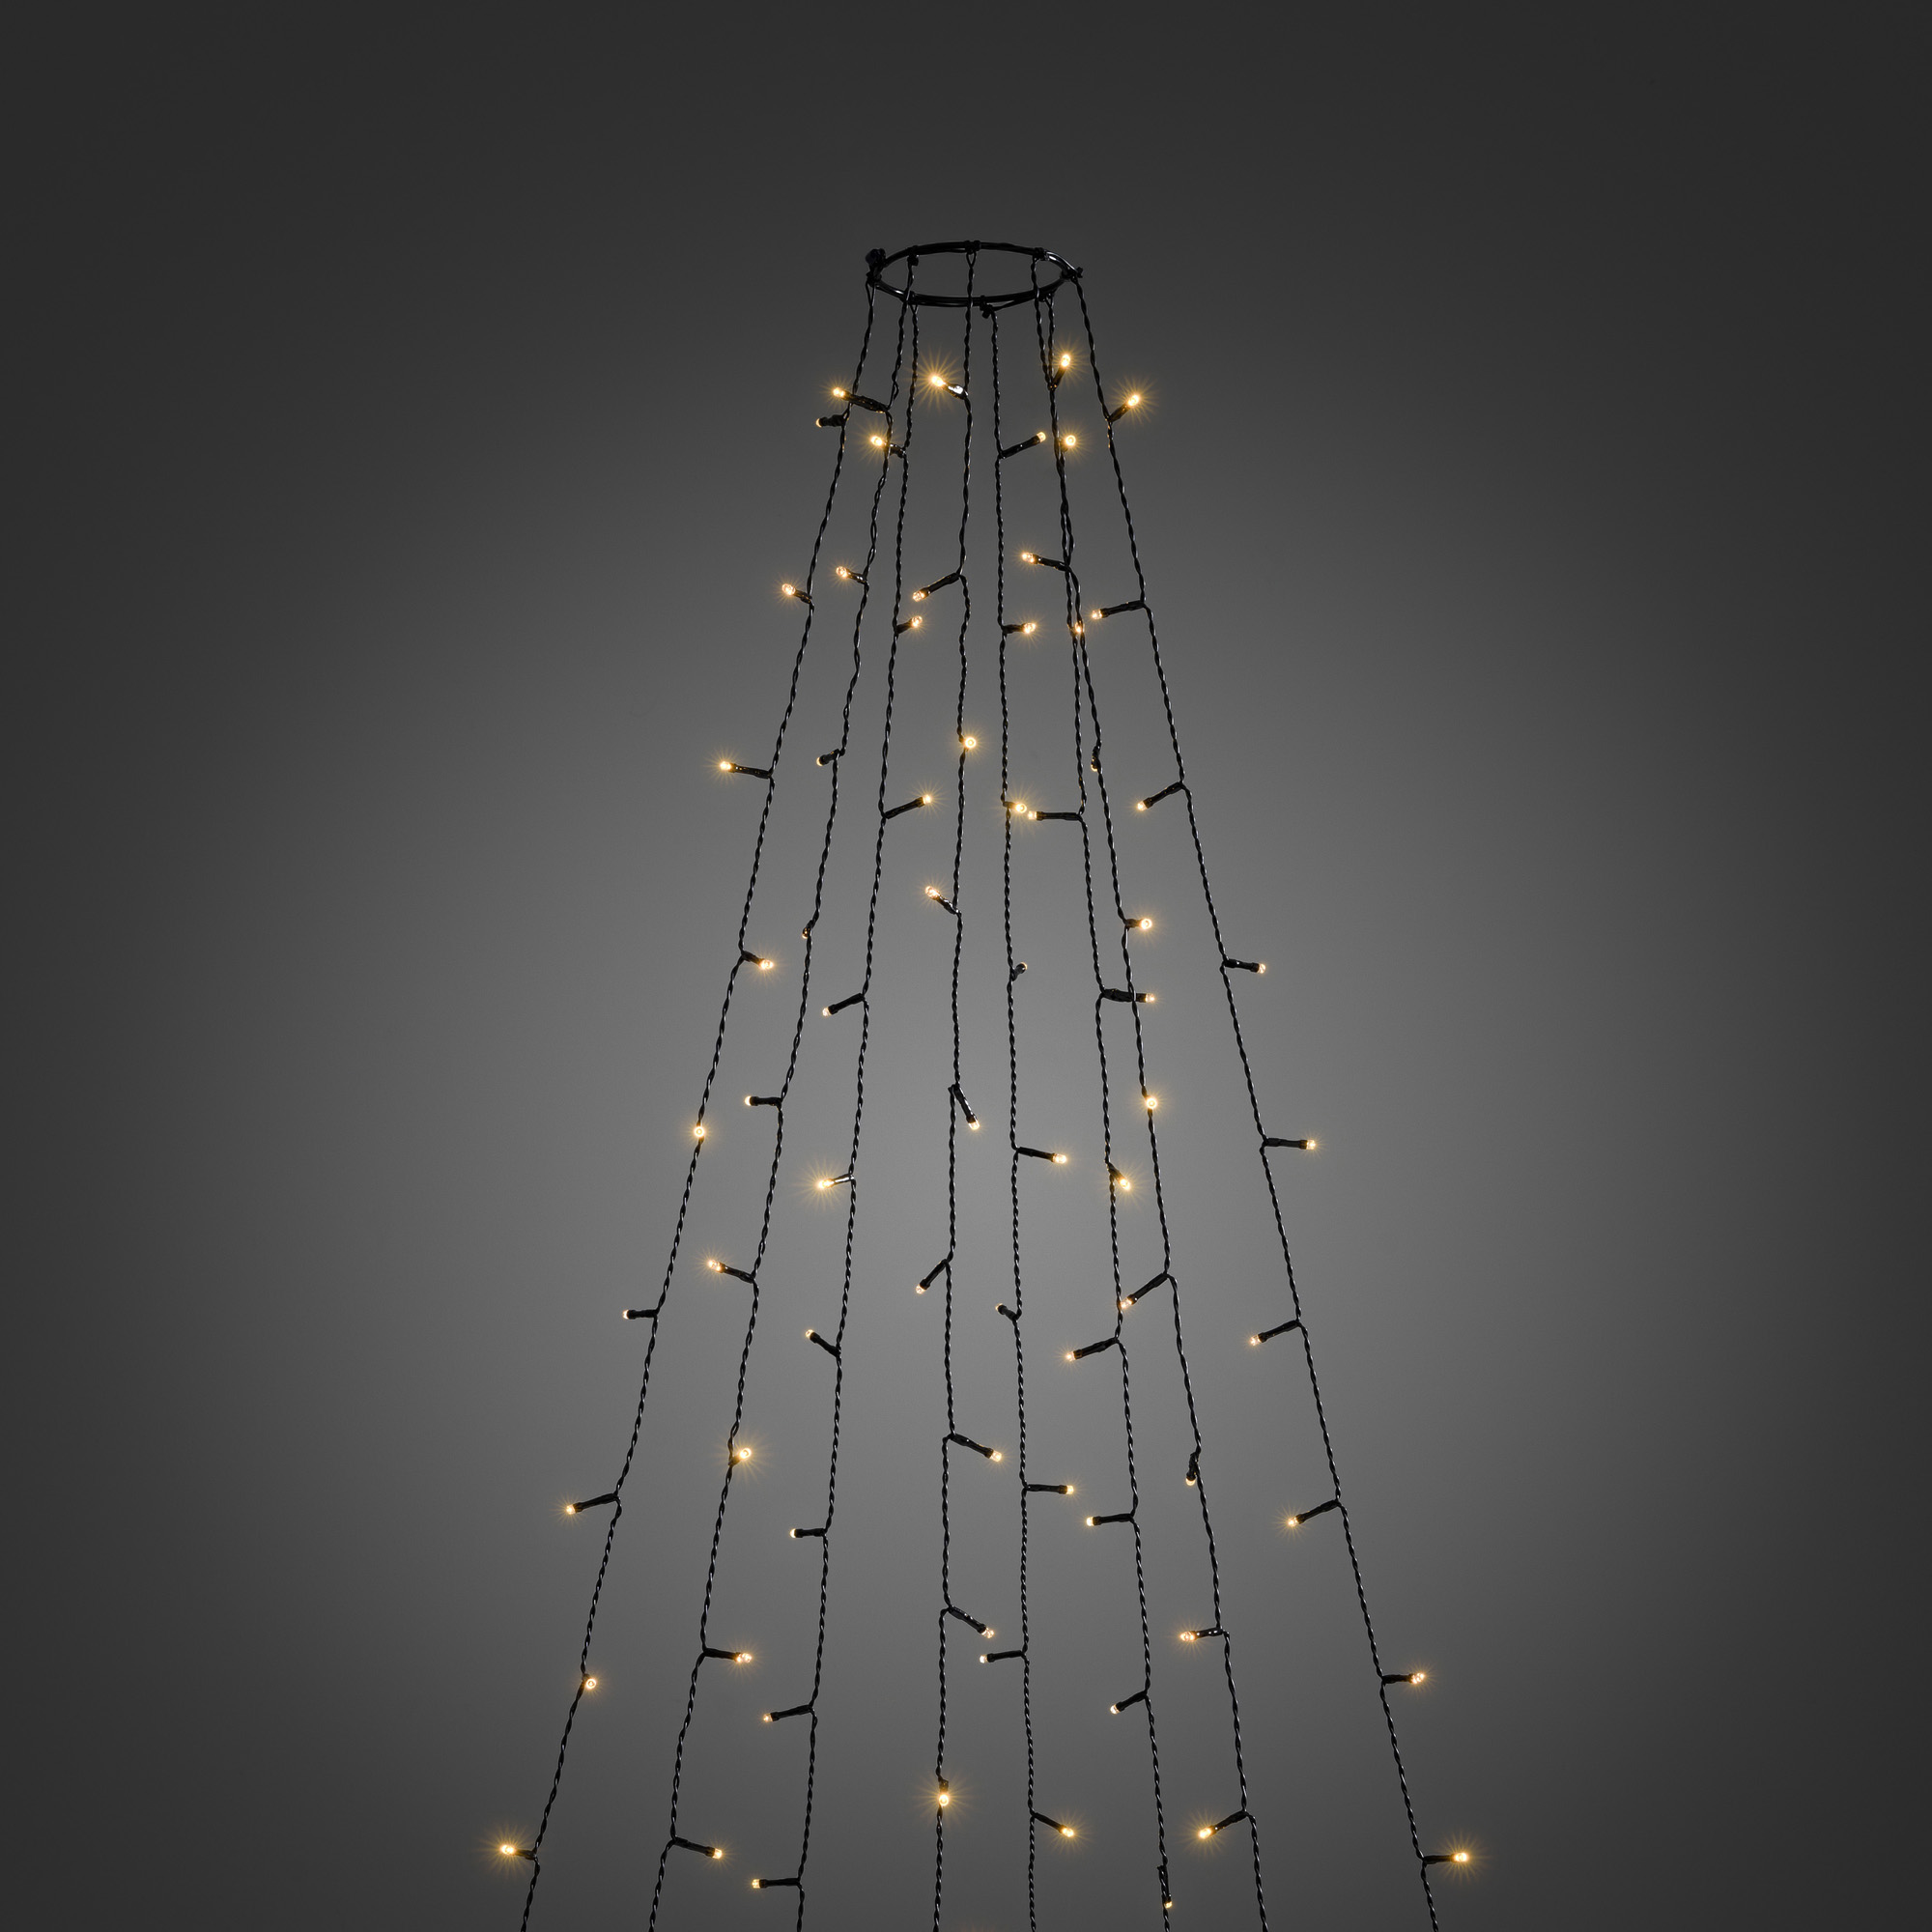 LED Tree Coat amber, 8 strings of 2.4m (30 LEDs each), with multifunction, app-controlled